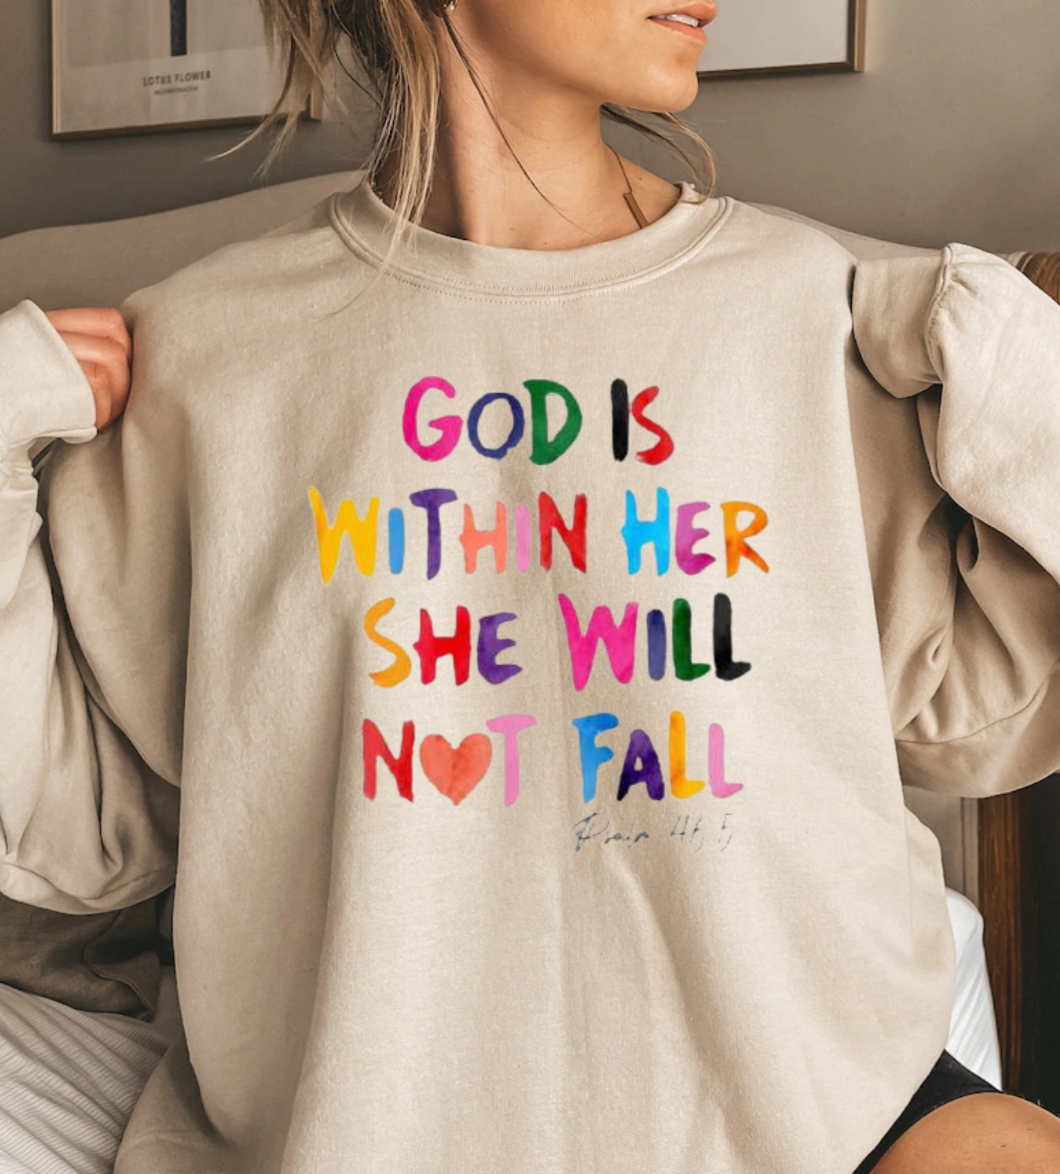 God Is Within Her She will Not Fall